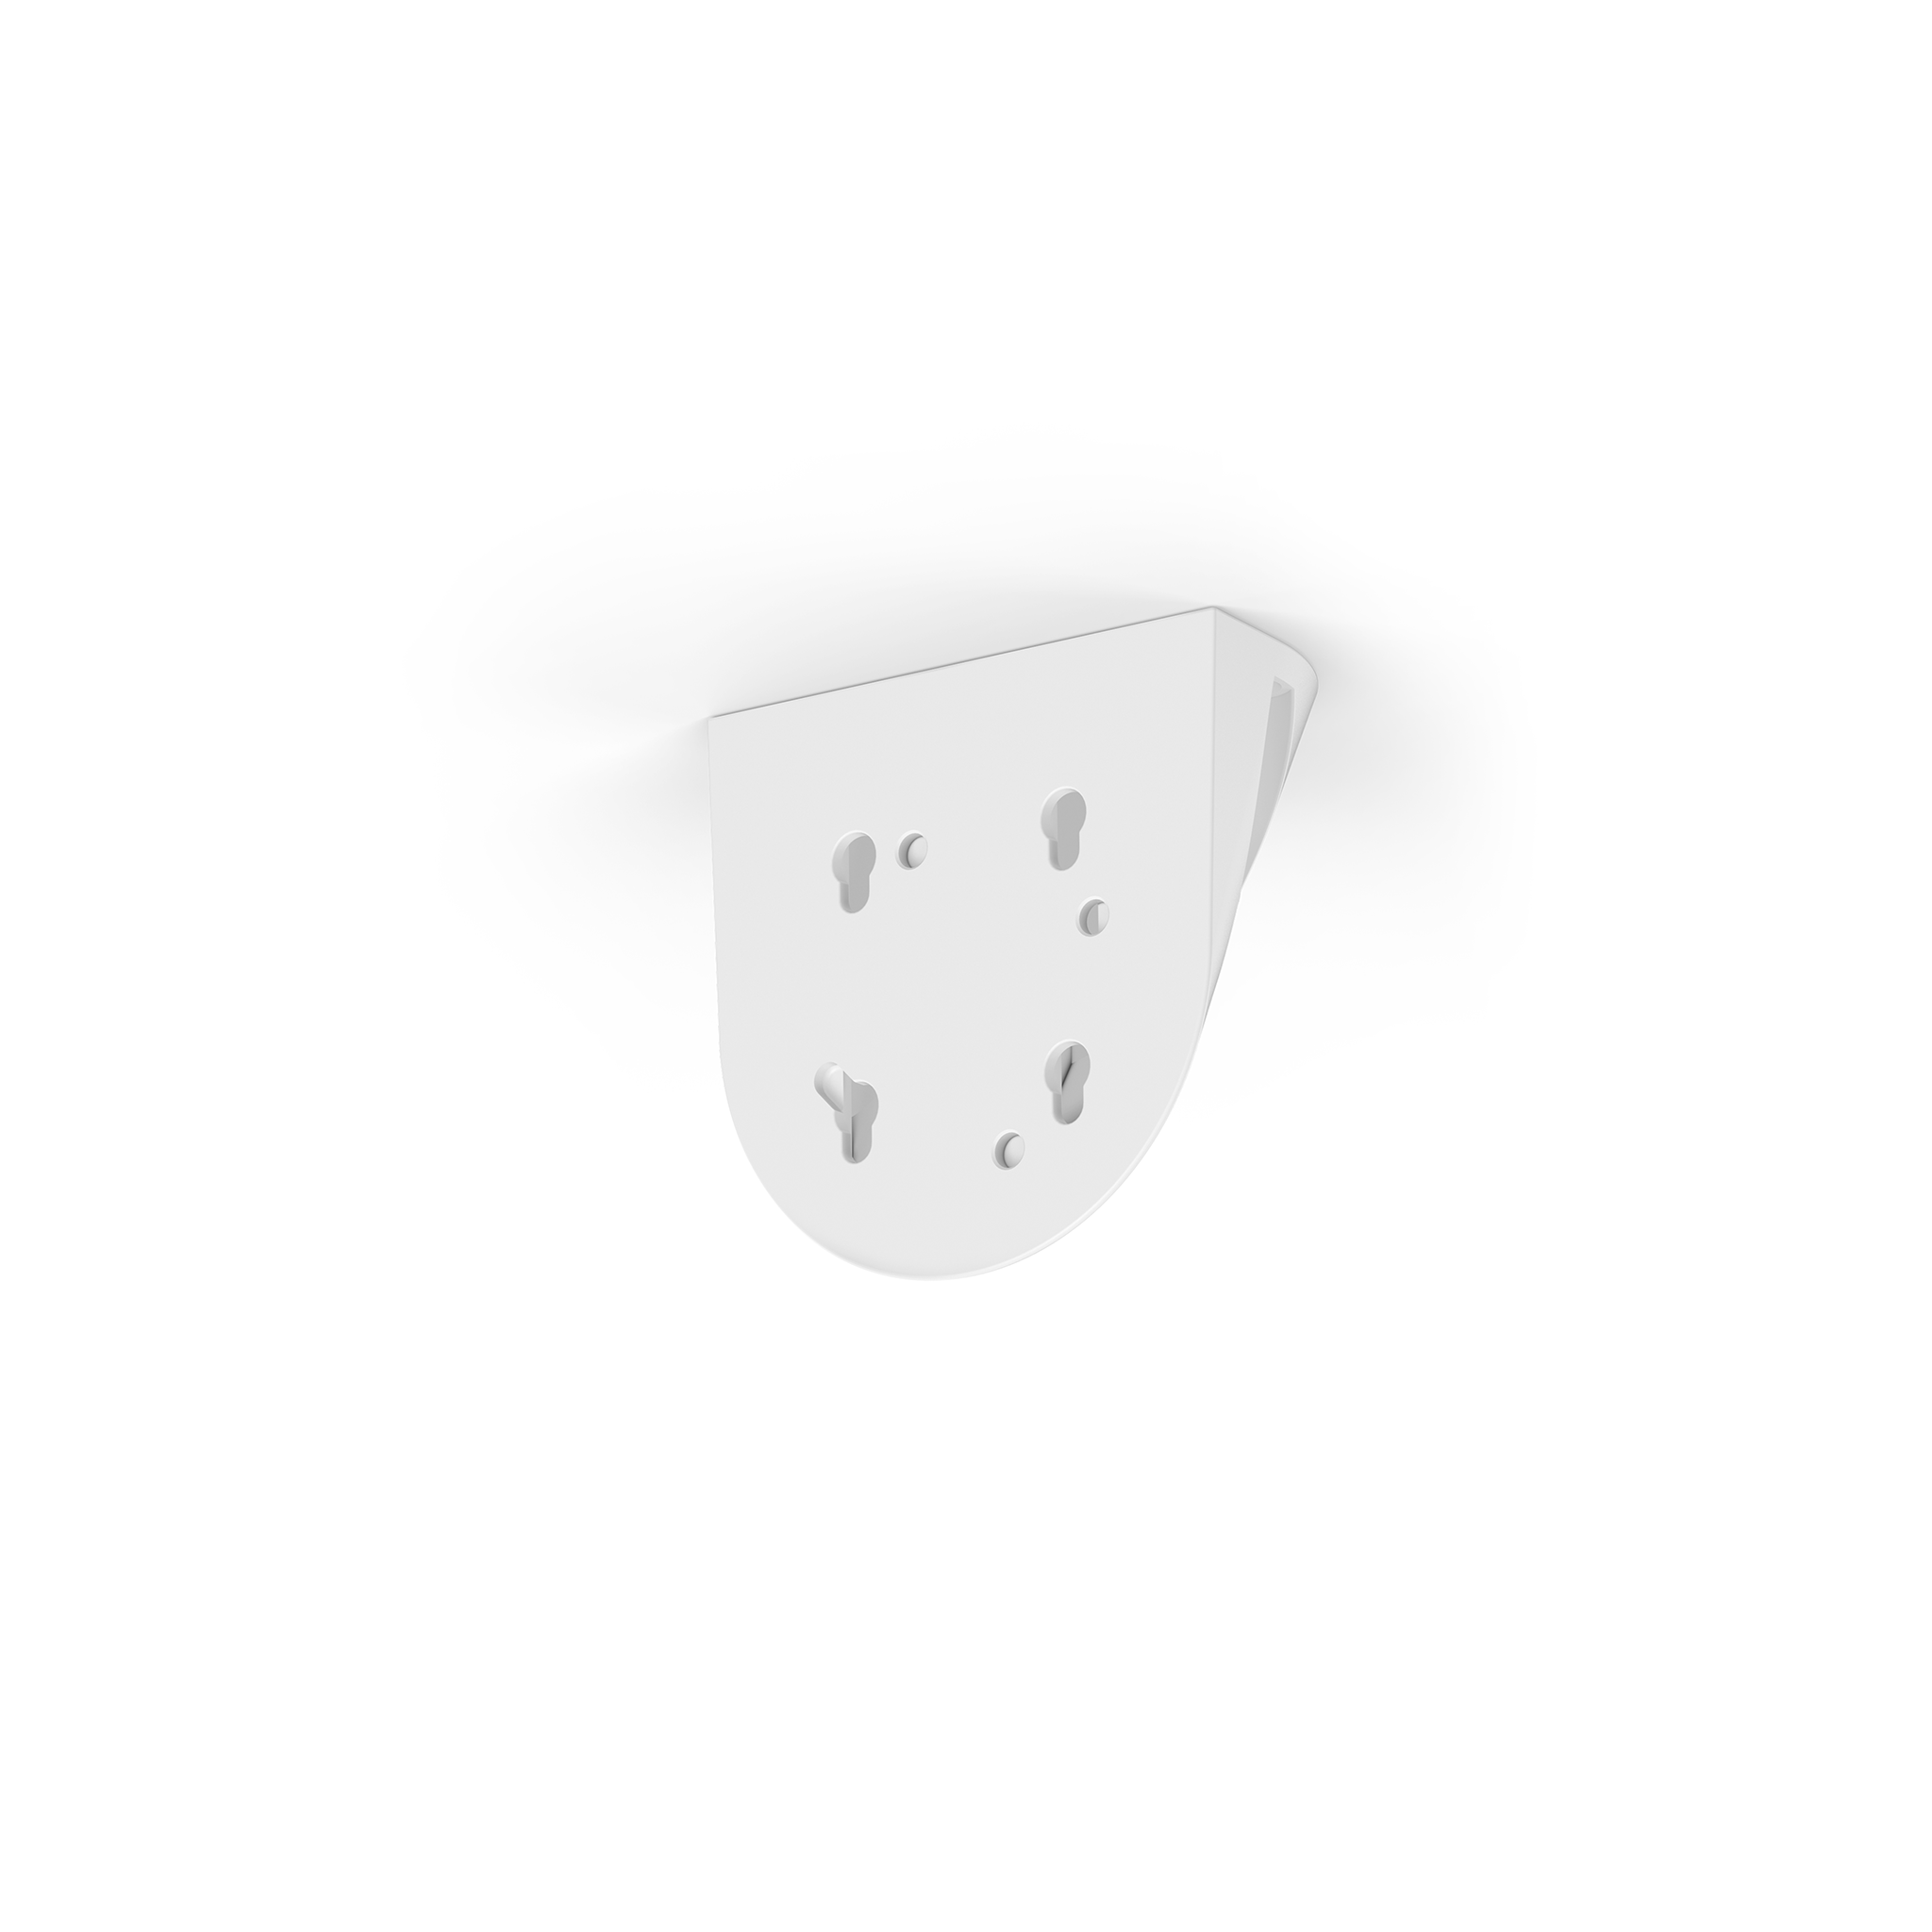 Ceiling Mount (for Spotlight Cam Wired) - White